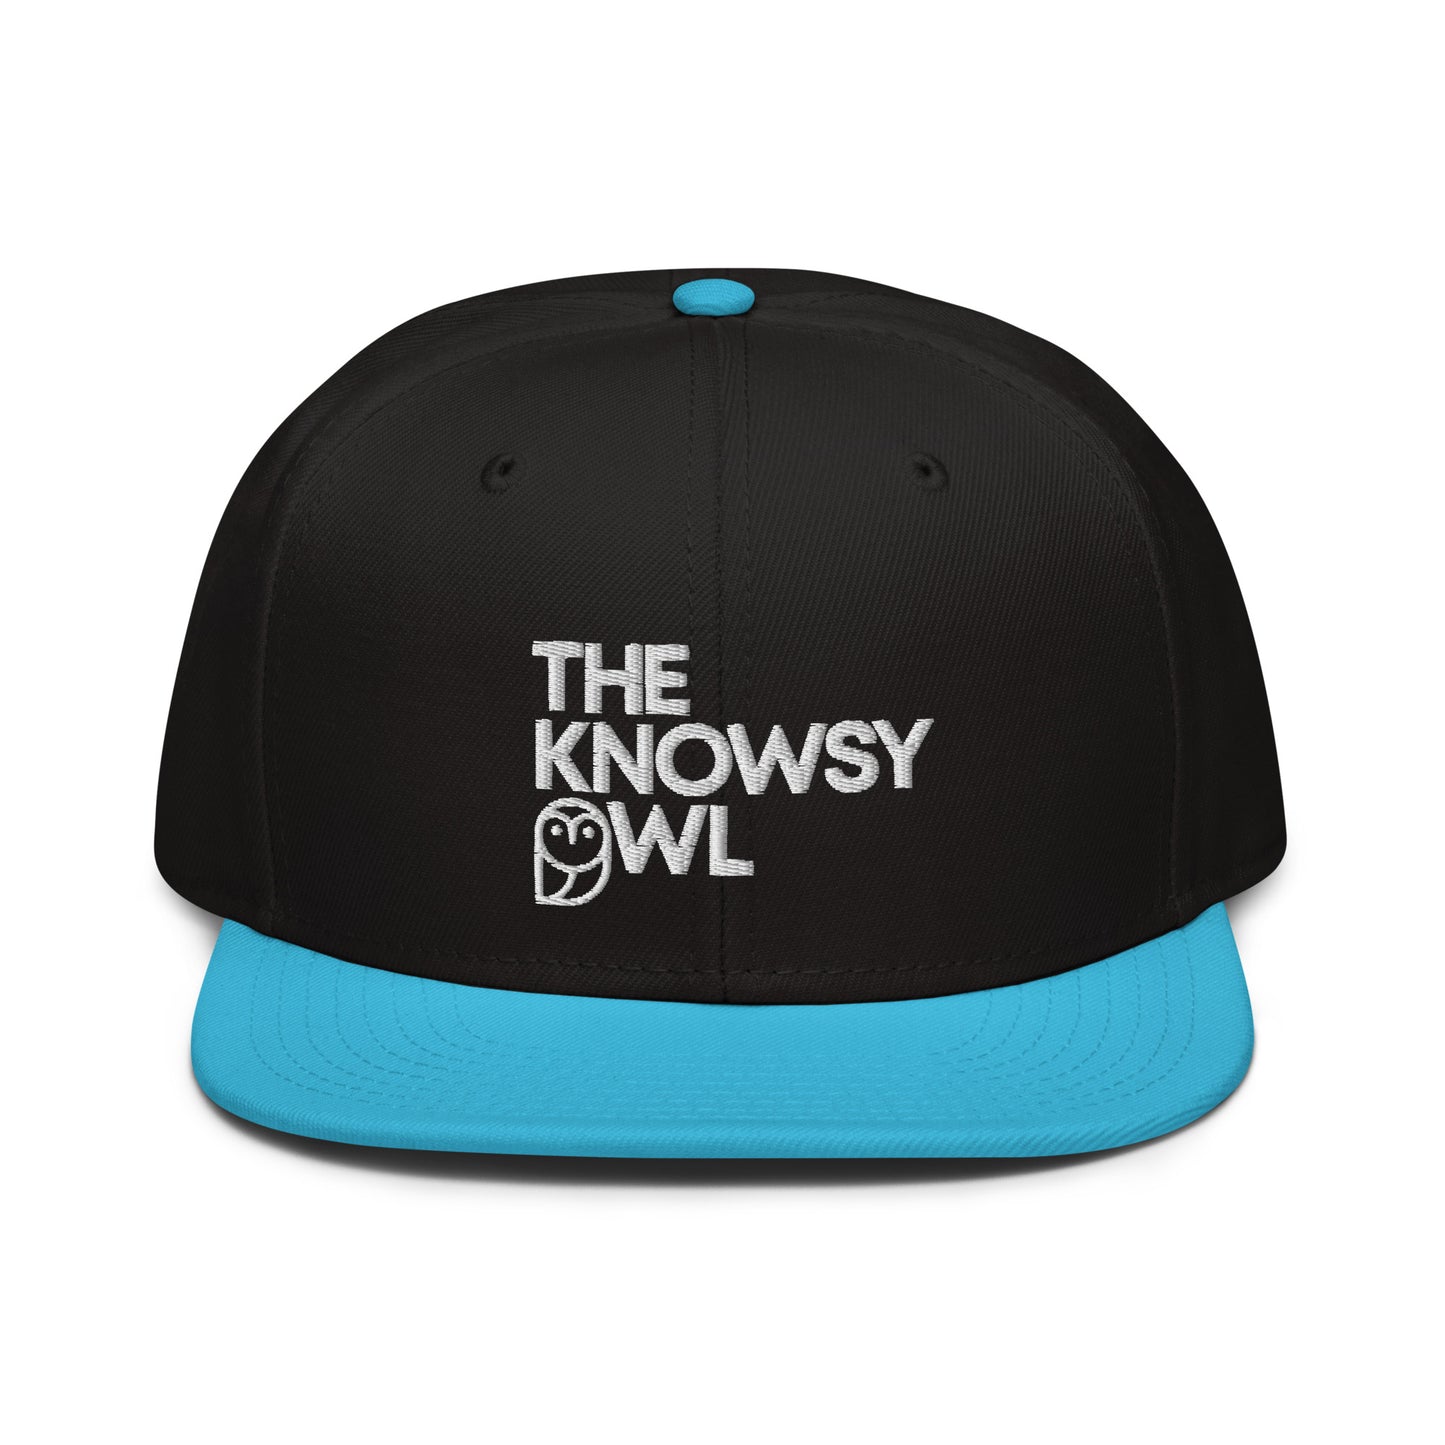 The Knowsy Owl Snapback Hat